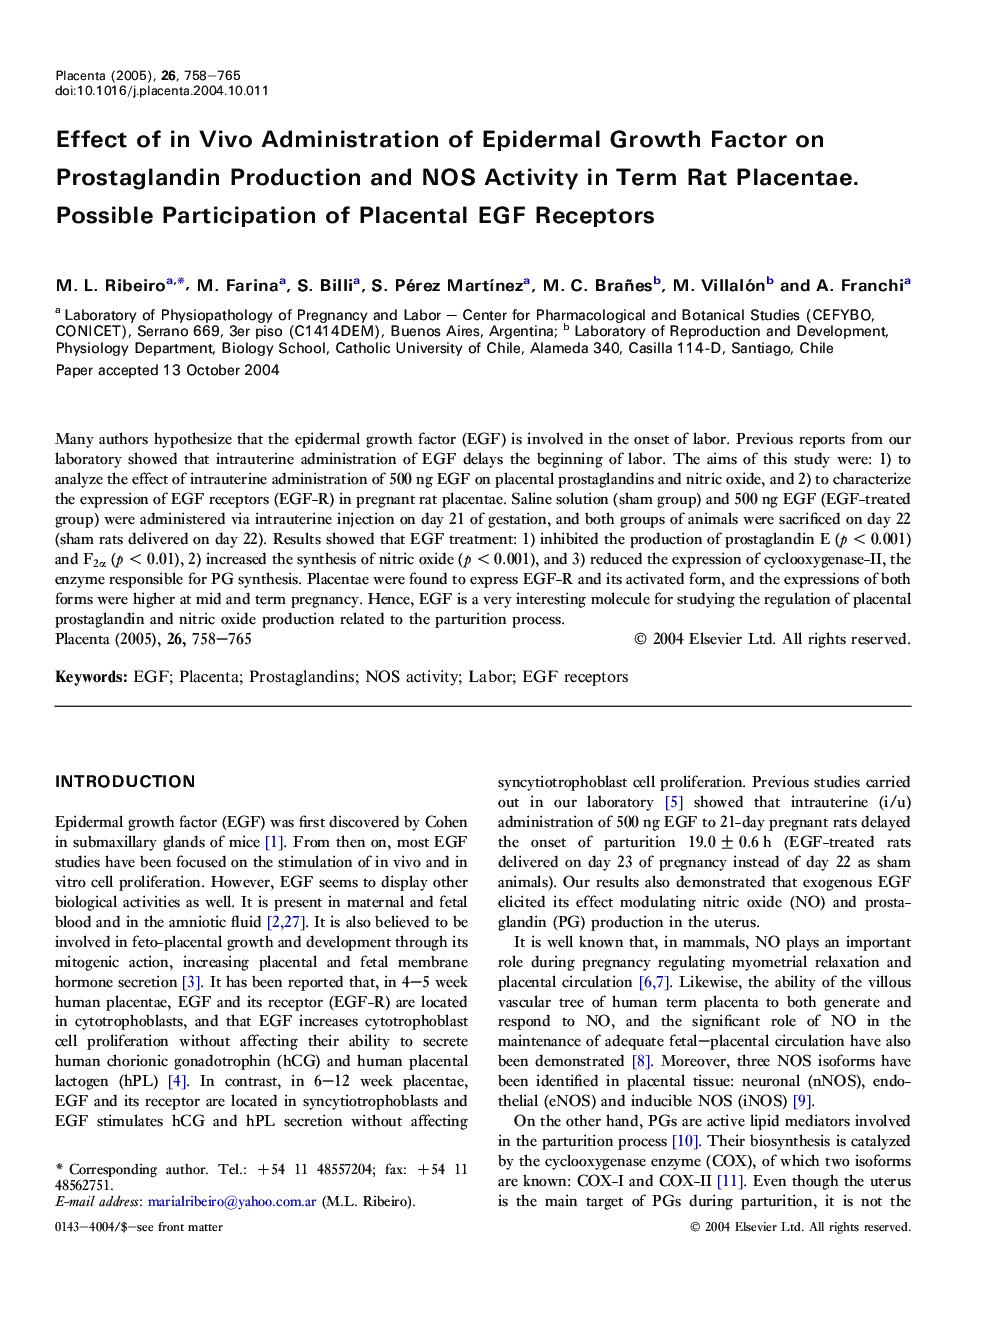 Effect of in vivo administration of epidermal growth factor on prostaglandin production and NOS activity in term rat placentae. Possible participation of placental EGF receptors